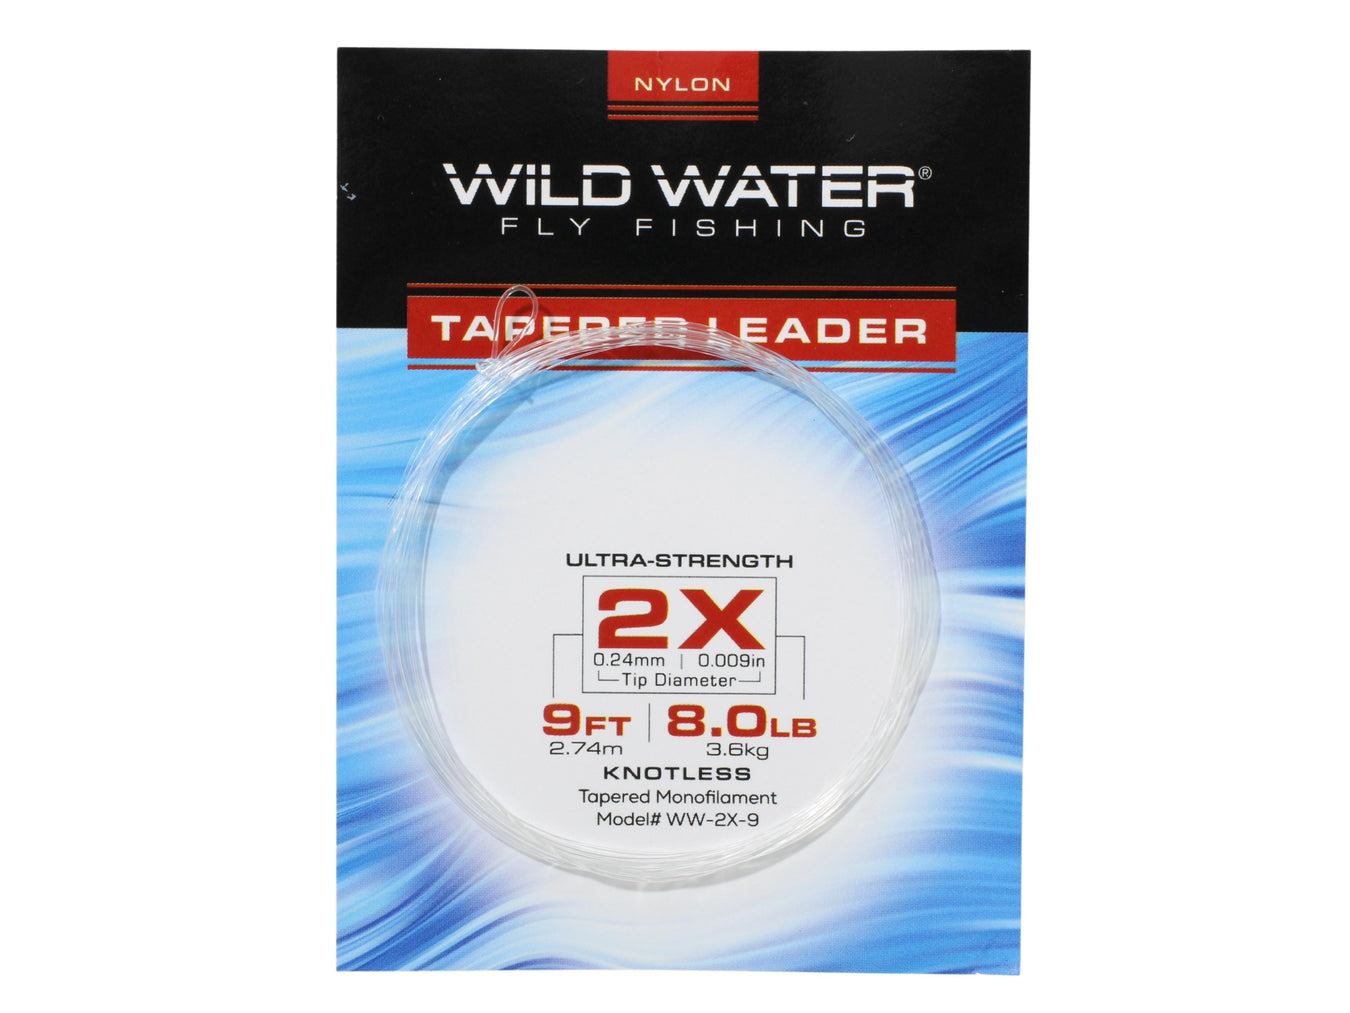 Wild Water Fly Fishing 2X Leaders